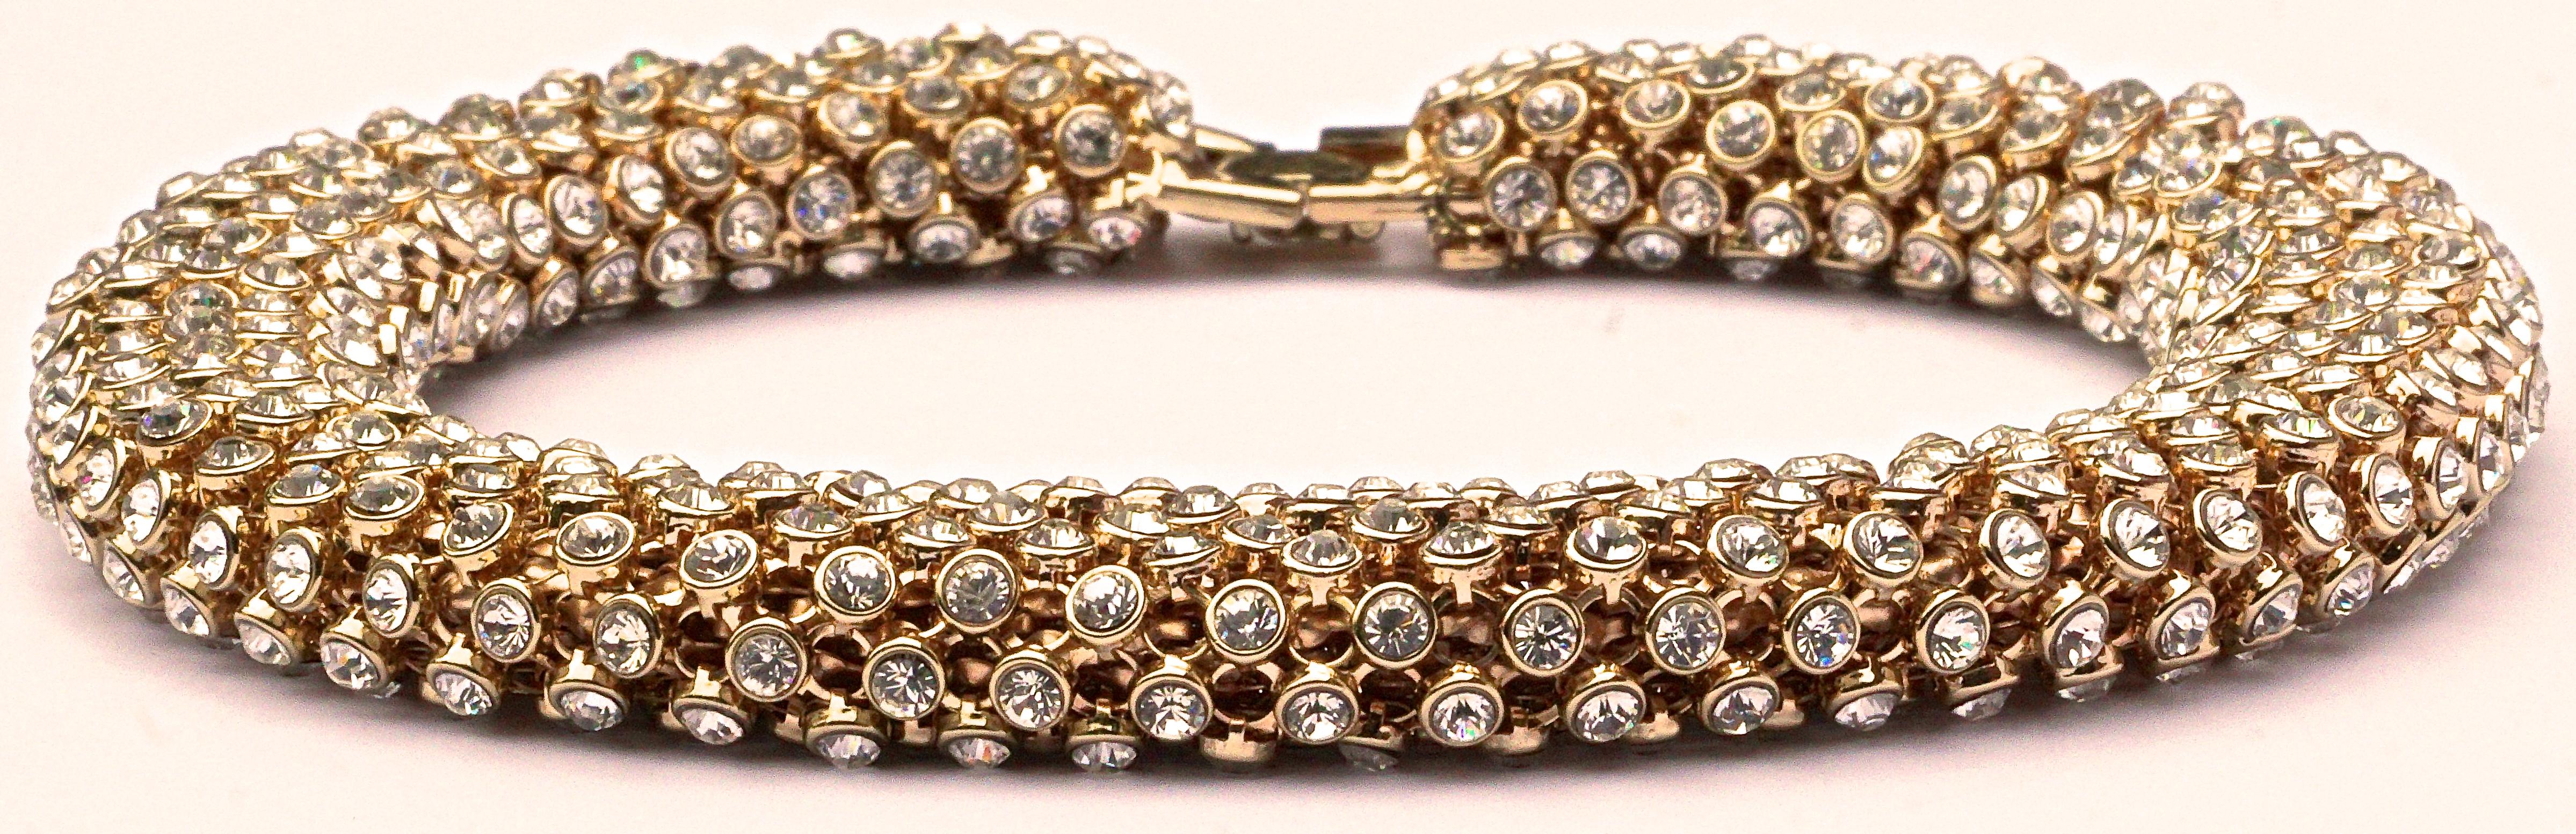 Gold Tone and Clear Rhinestones Vintage Collar Necklace, circa 1980s 1